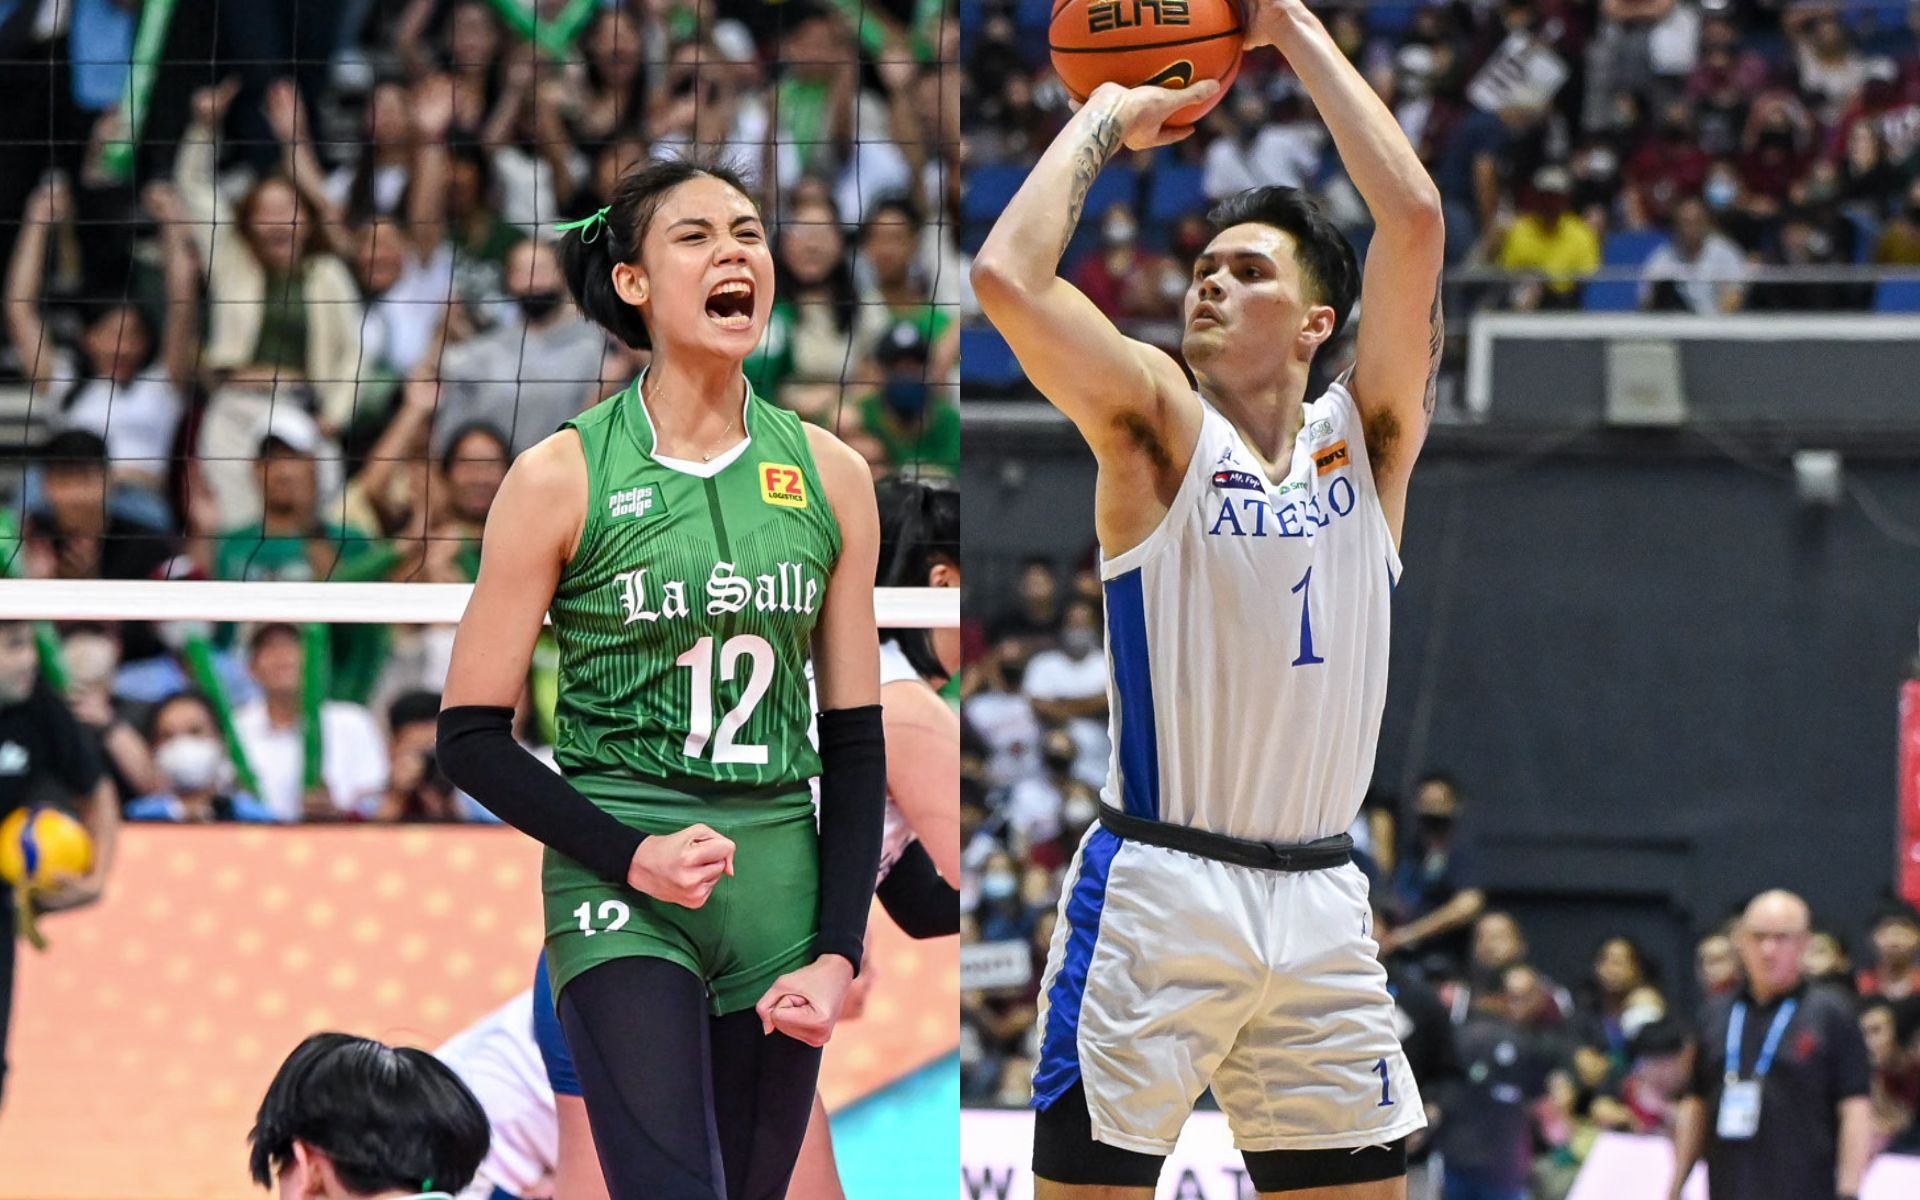 No-go pro: UAAP maintains stance on disallowing pro guest licenses for athletes